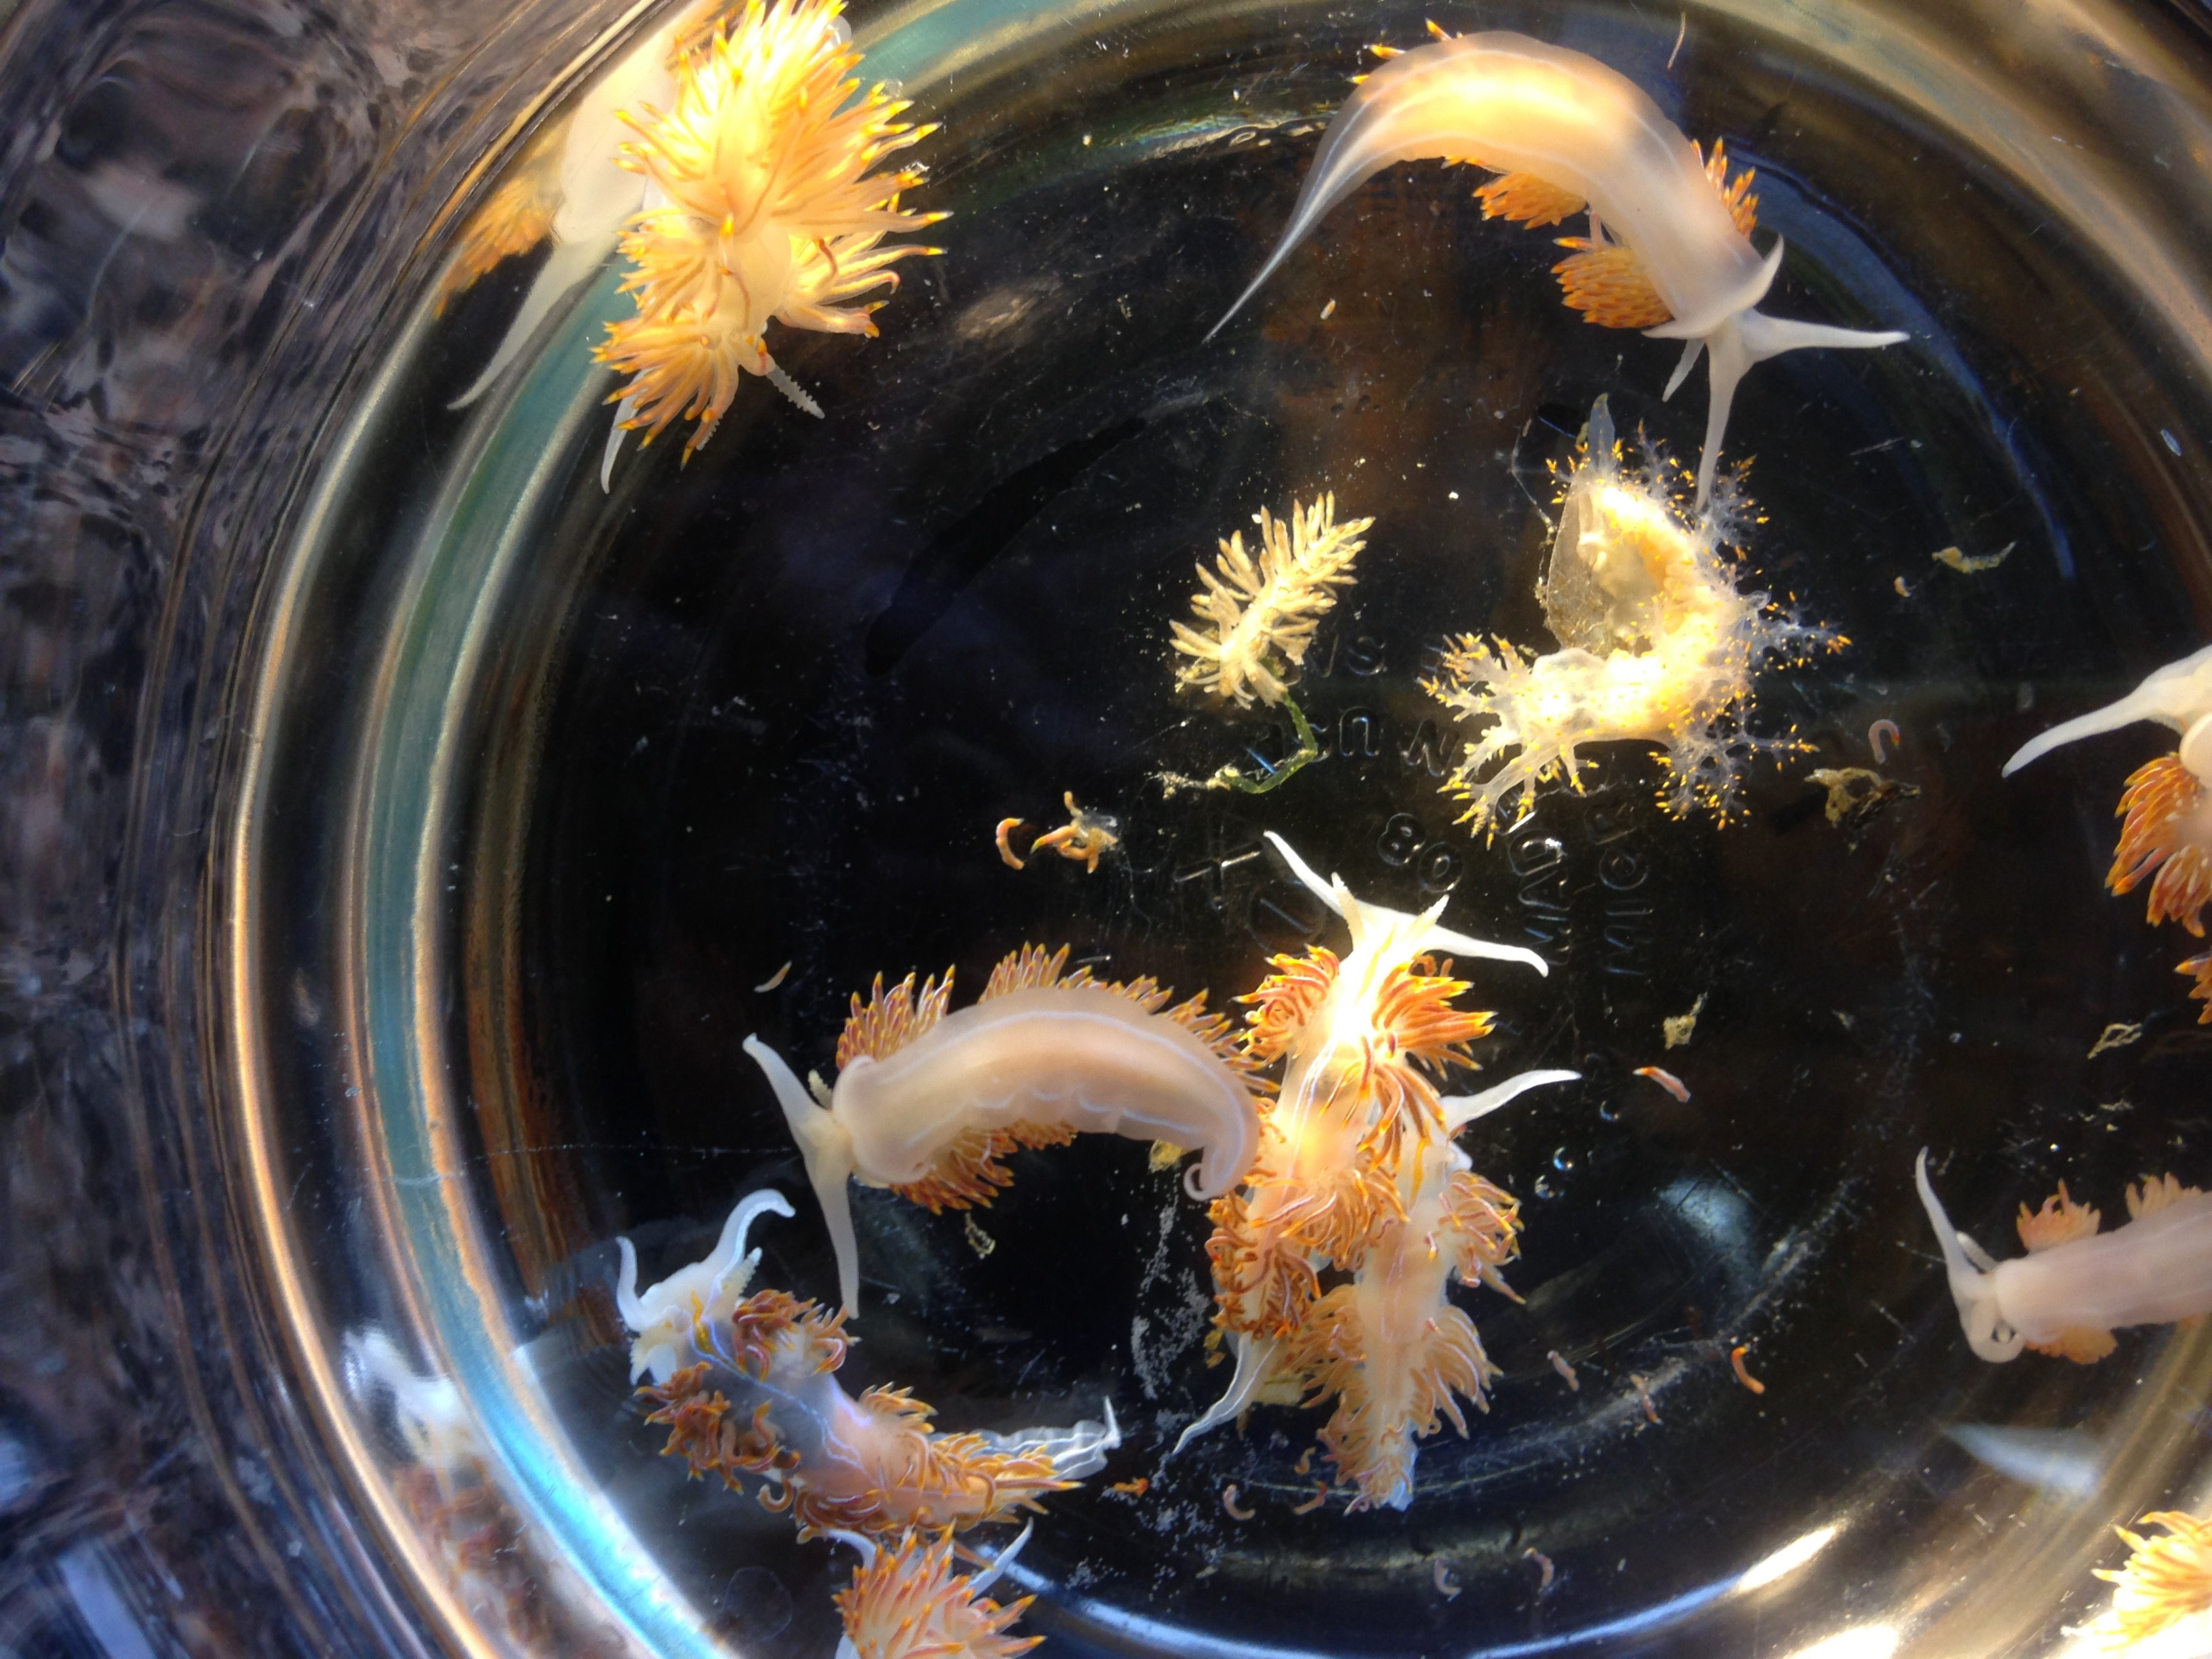 Marine sea slugs on a Japanese derelict vessel from Iwate Prefecture washed ashore in Oregon, April 2015. Image Credit: John W. Chapman 